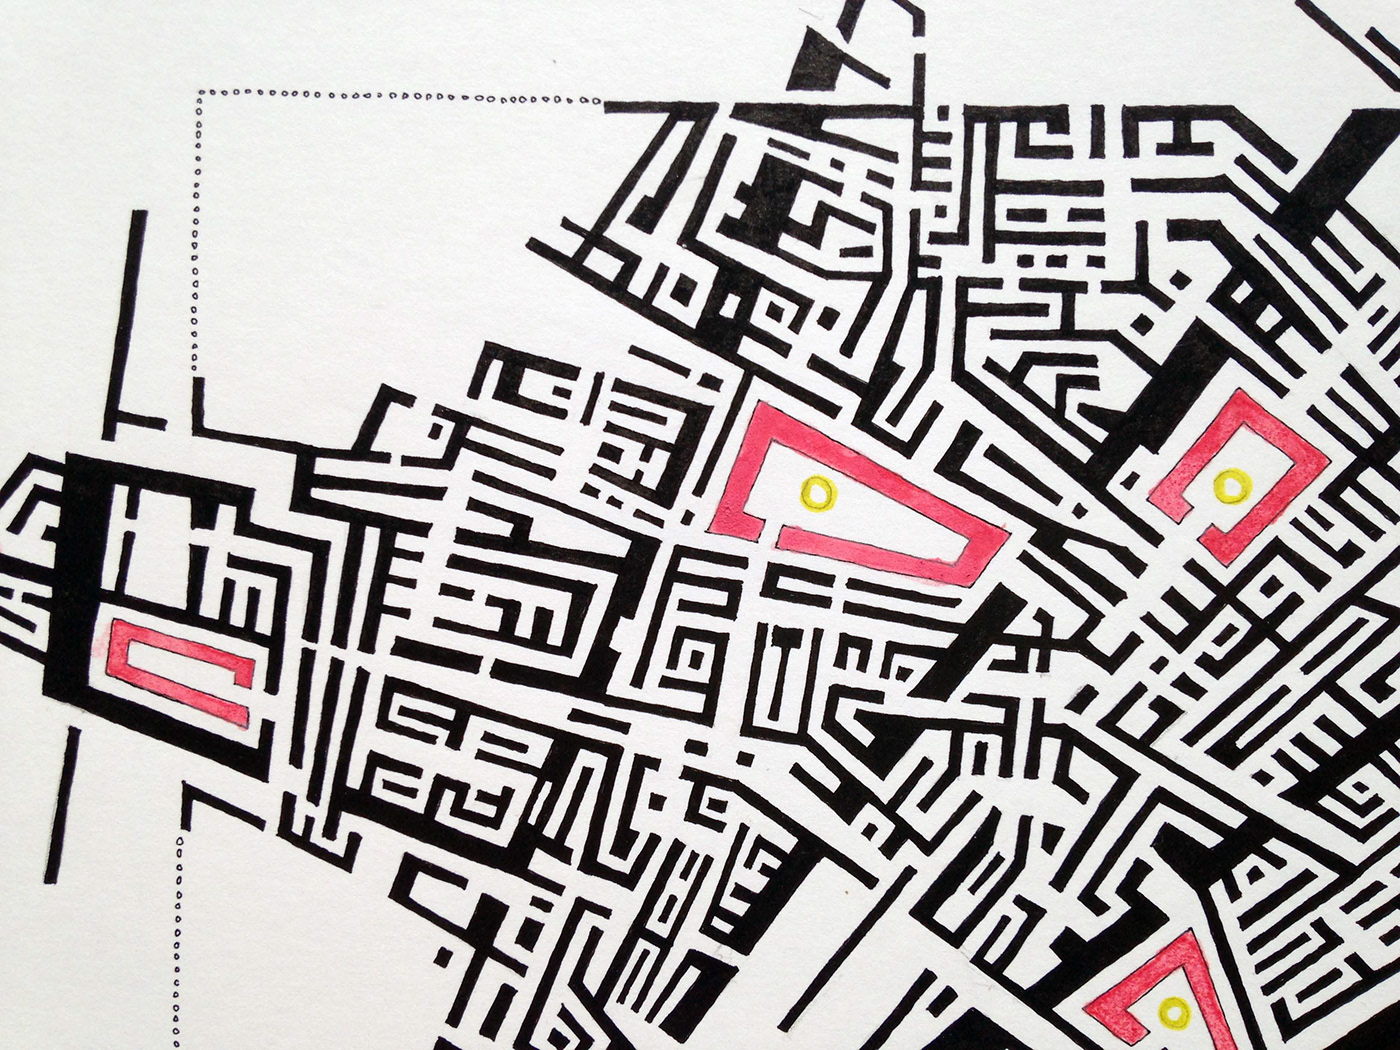 drawings art graphics abstract artwork maps labyrinth geometric modern contemporary art